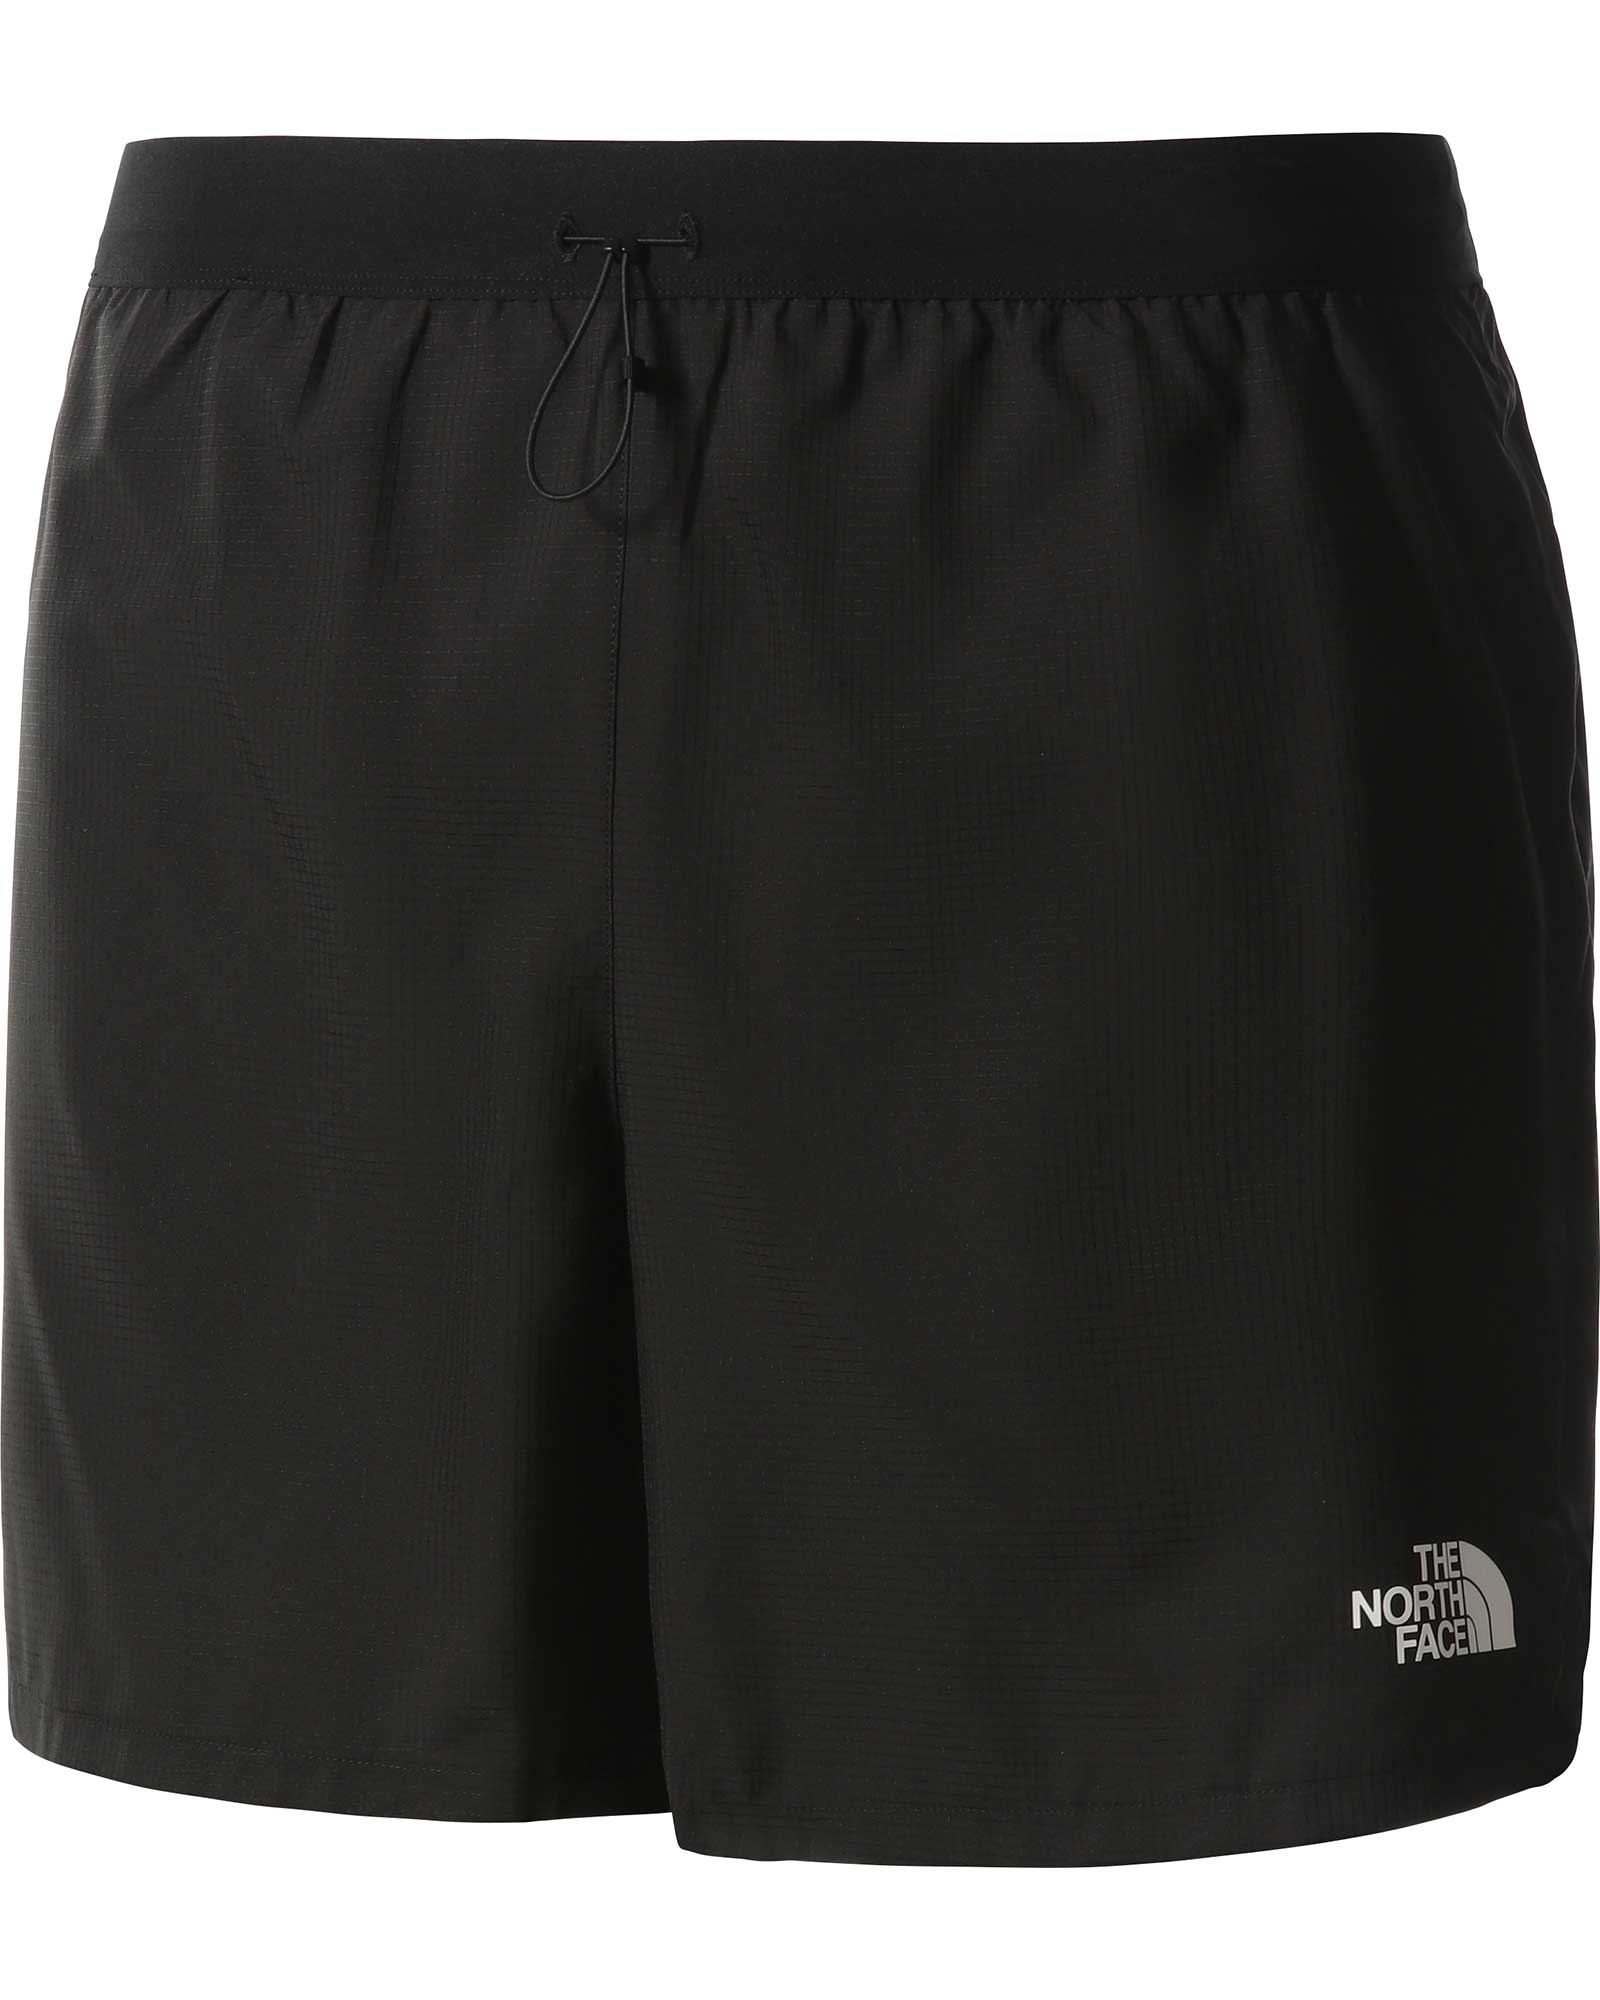 The North Face Sunriser Mens 2in1 Shorts